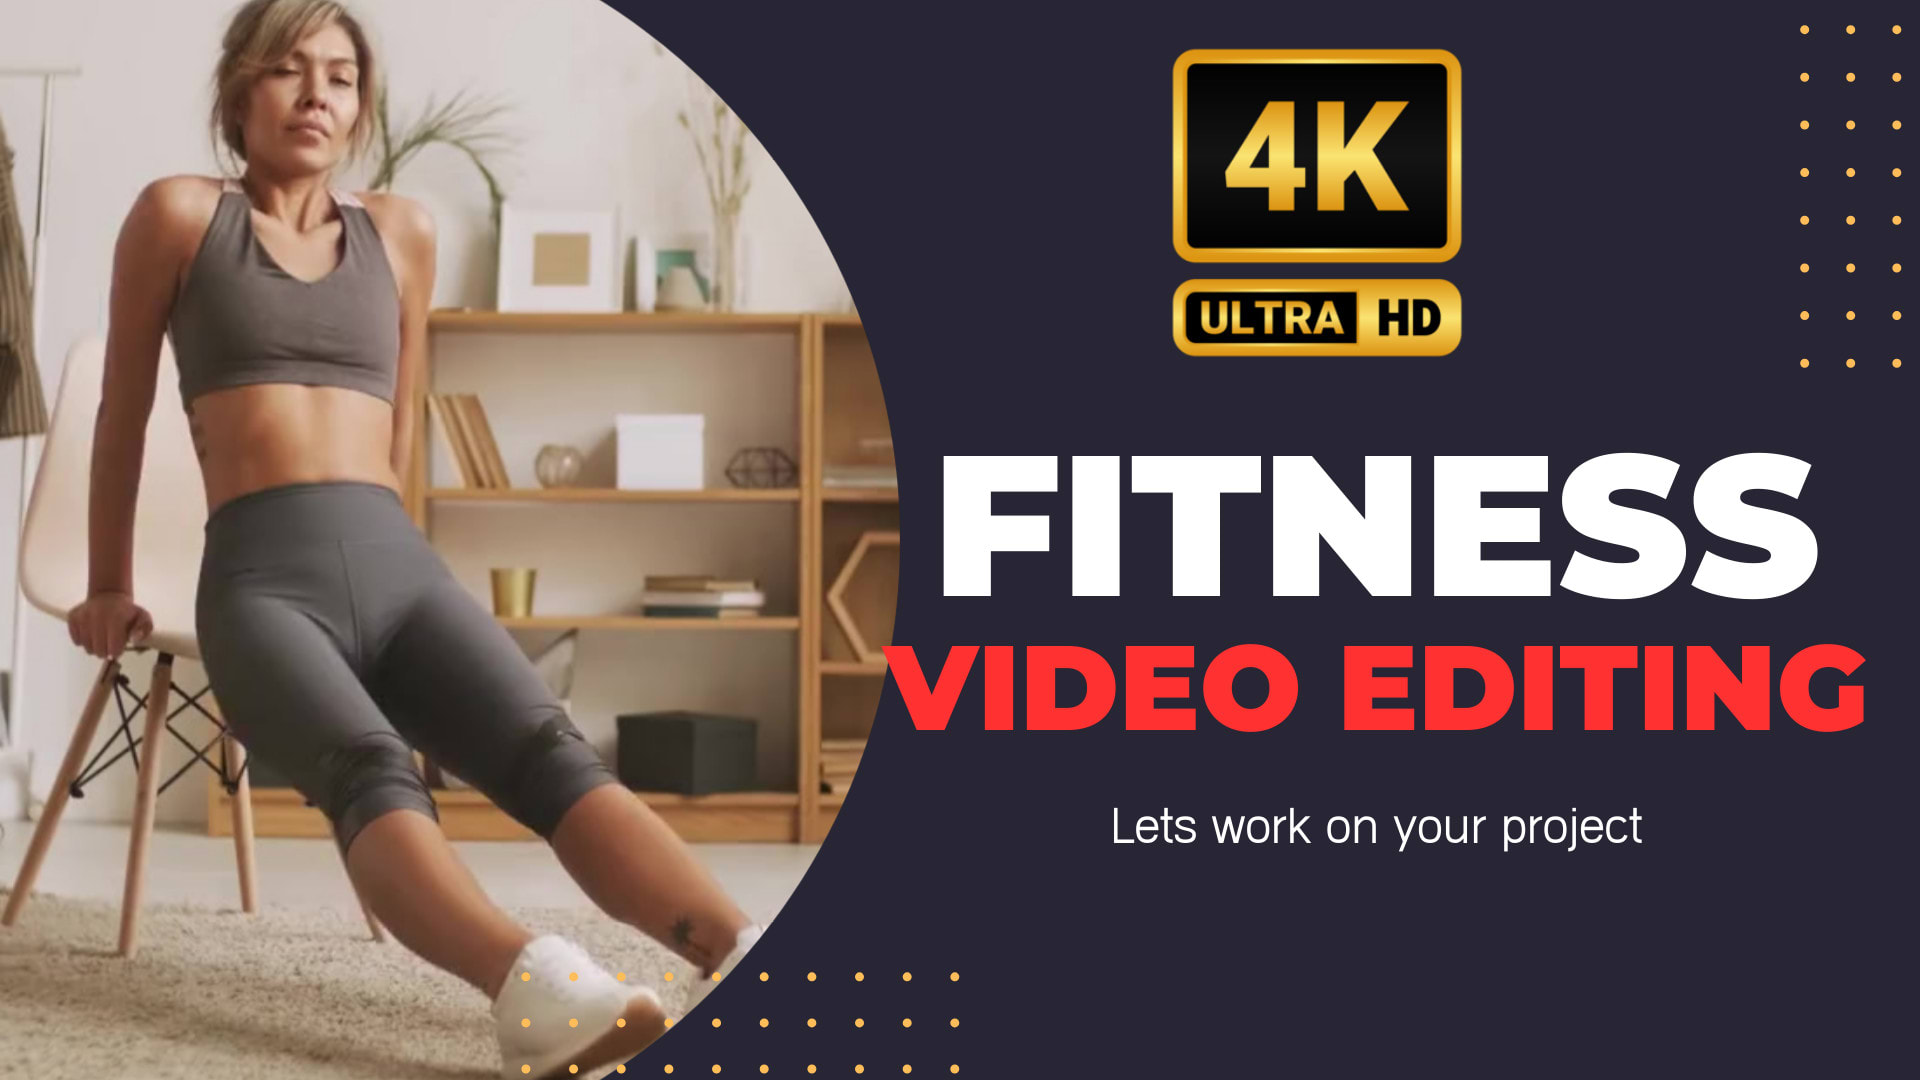 Edit 4k fitness yoga workout videos for youtube and courses